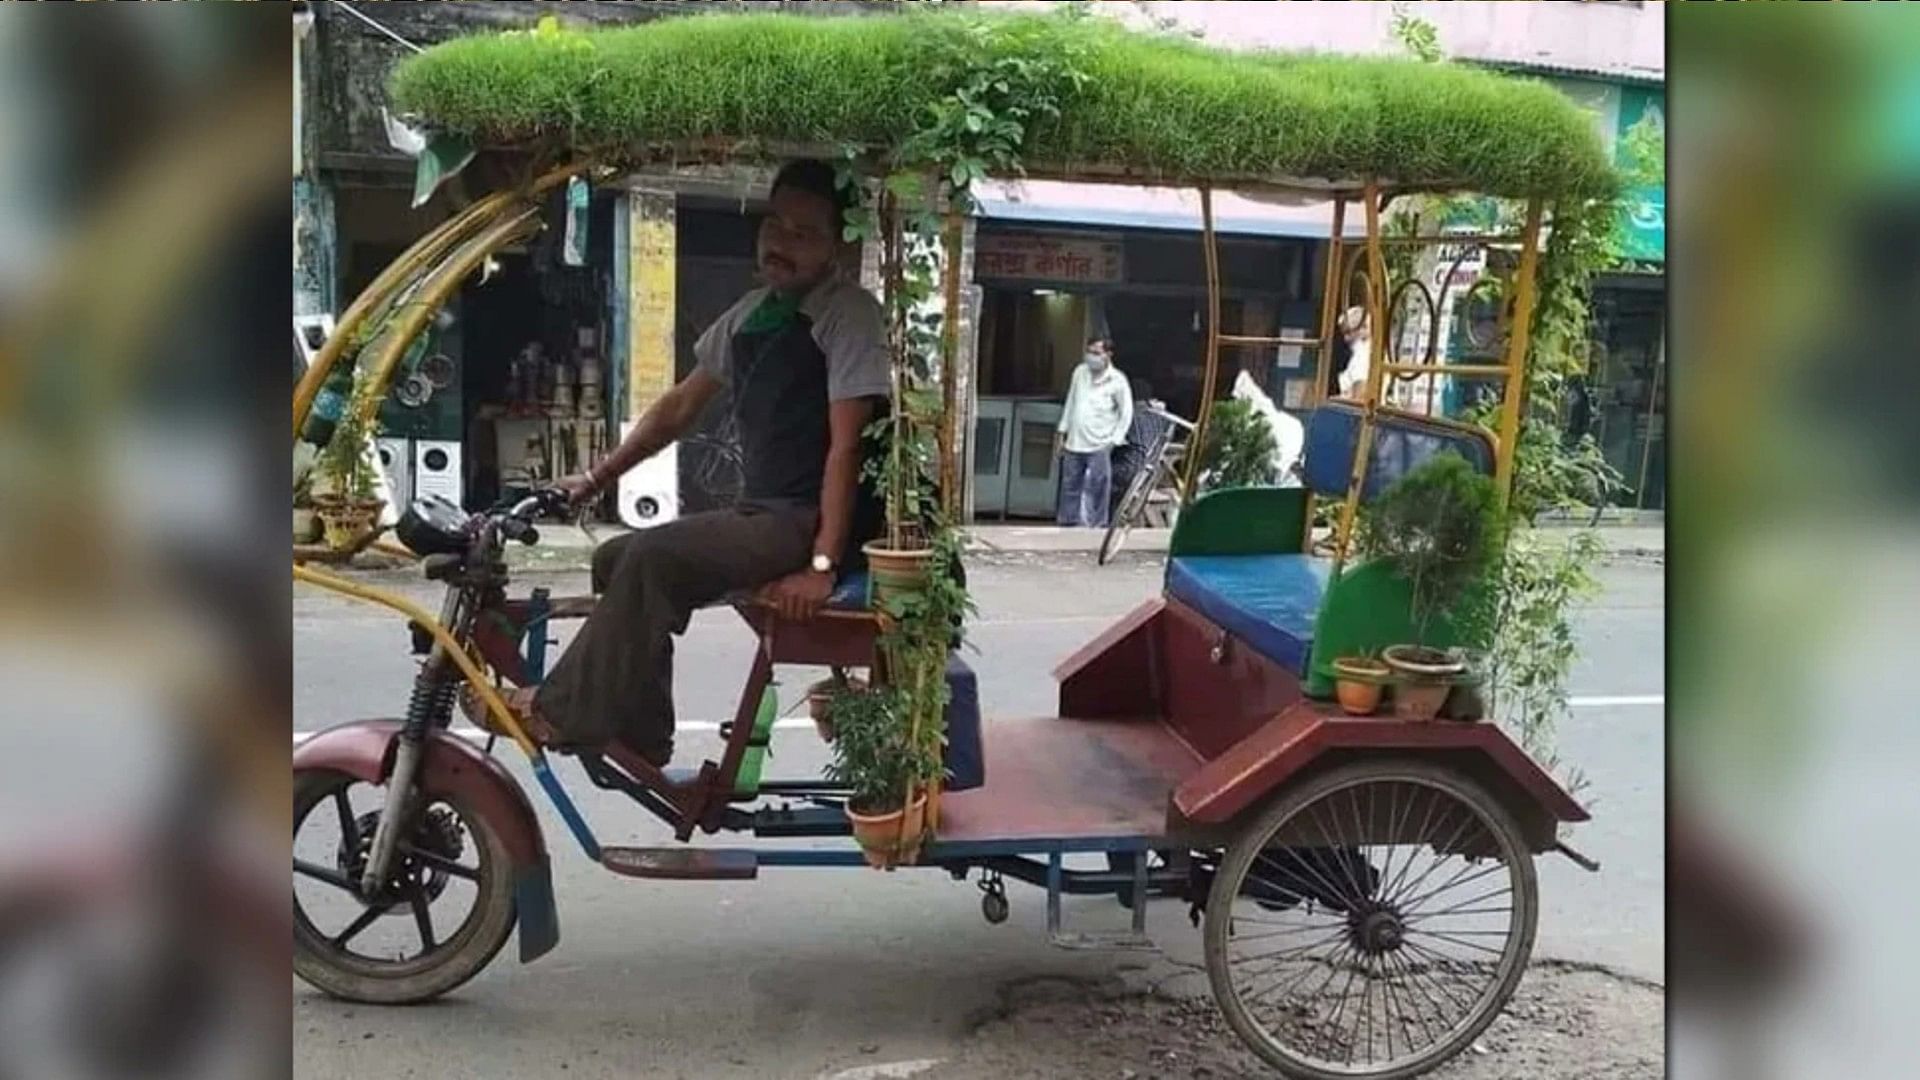 E rickshaw driver did such desi jugaad for summer picture is going viral on social media